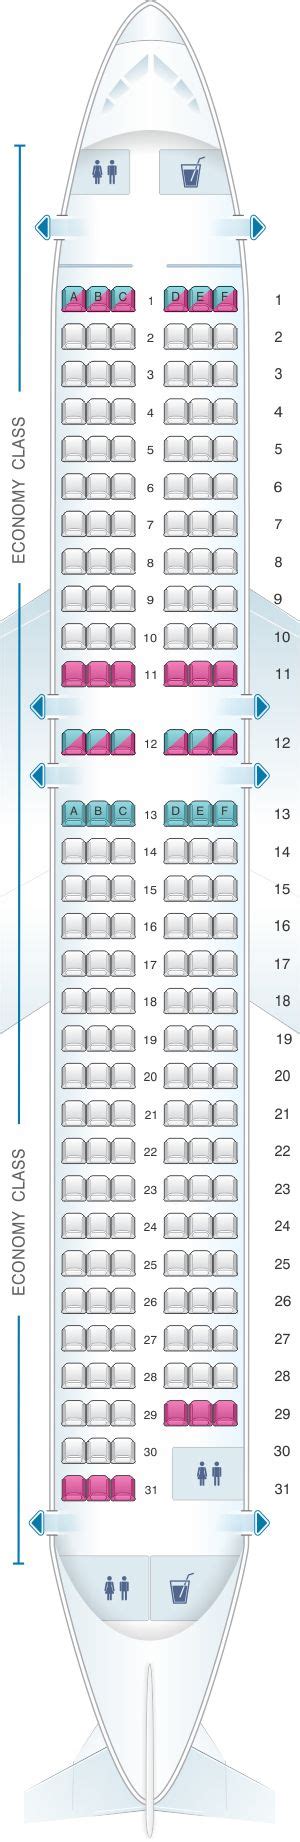 Seat Map Easyjet Airbus A320 Best Airplane American Airlines Air